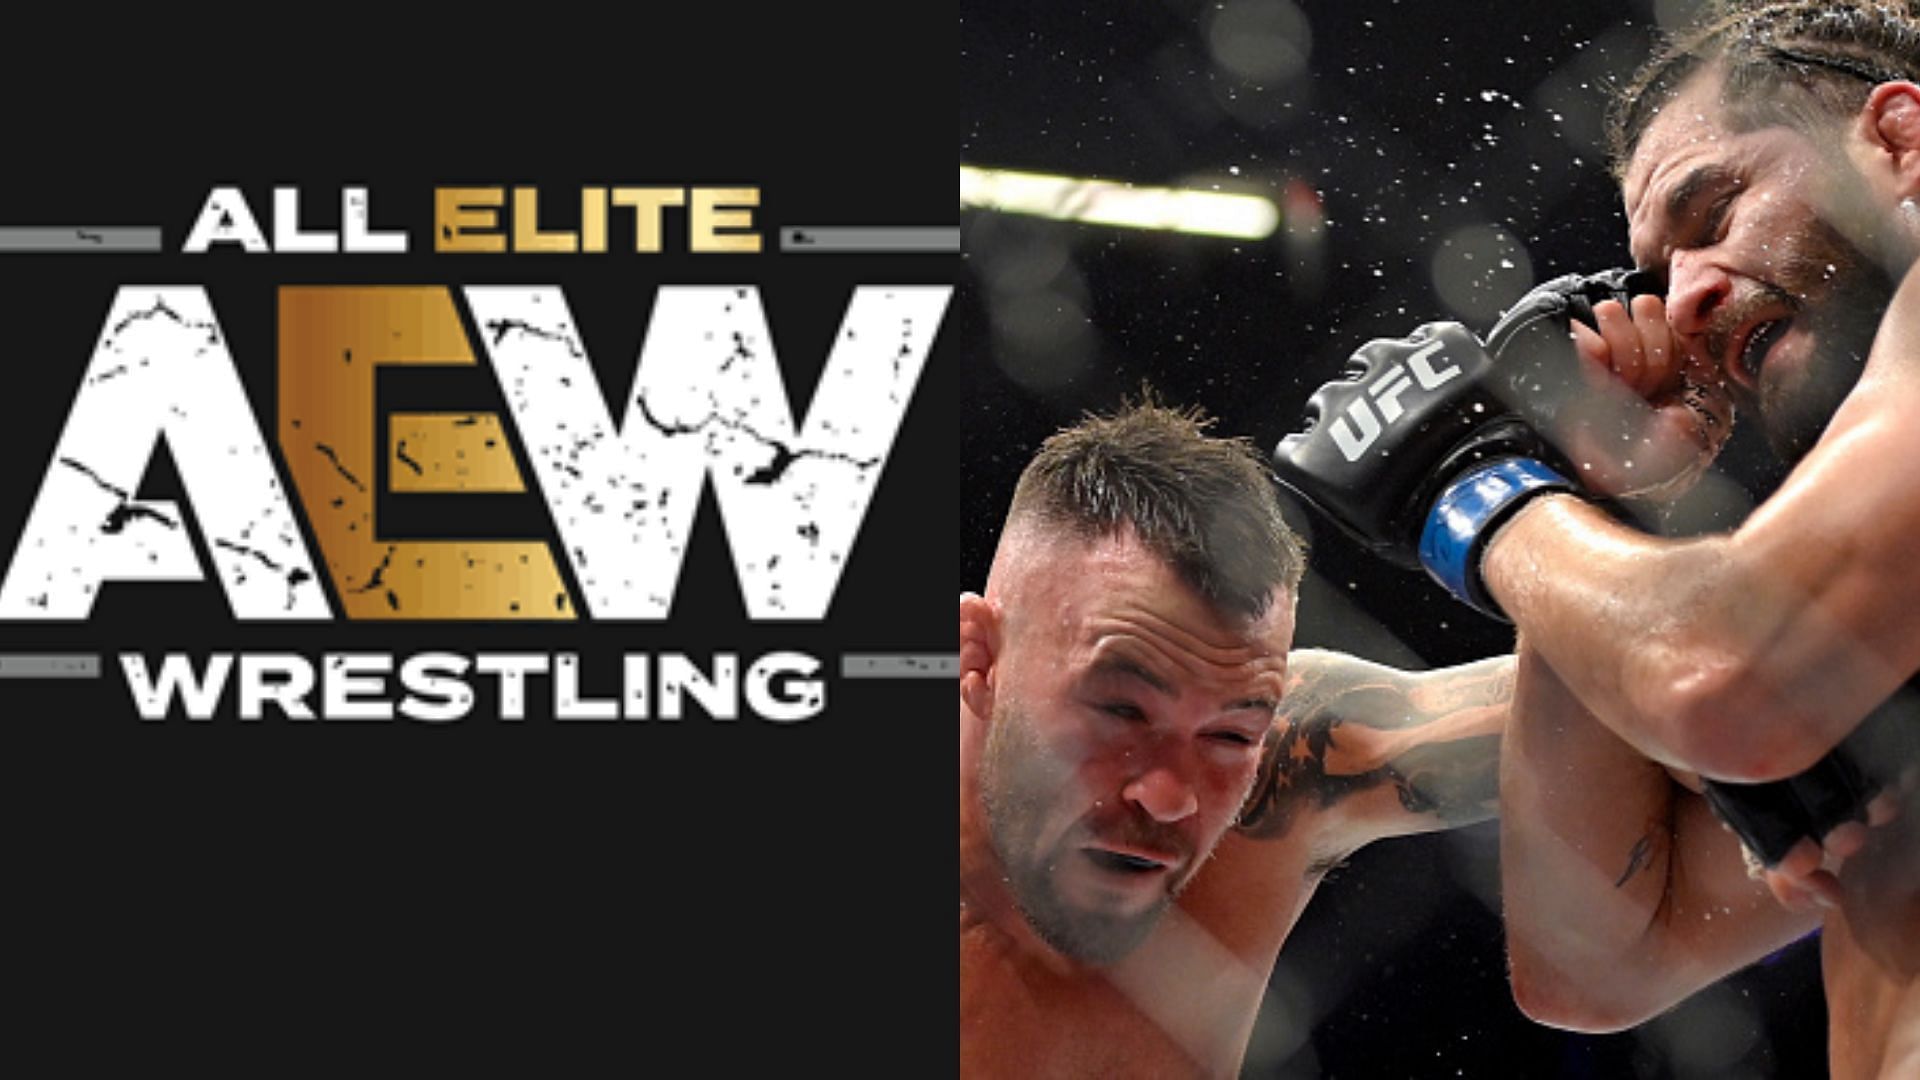 What did AEW stars have to say about Masvidal-Covington?